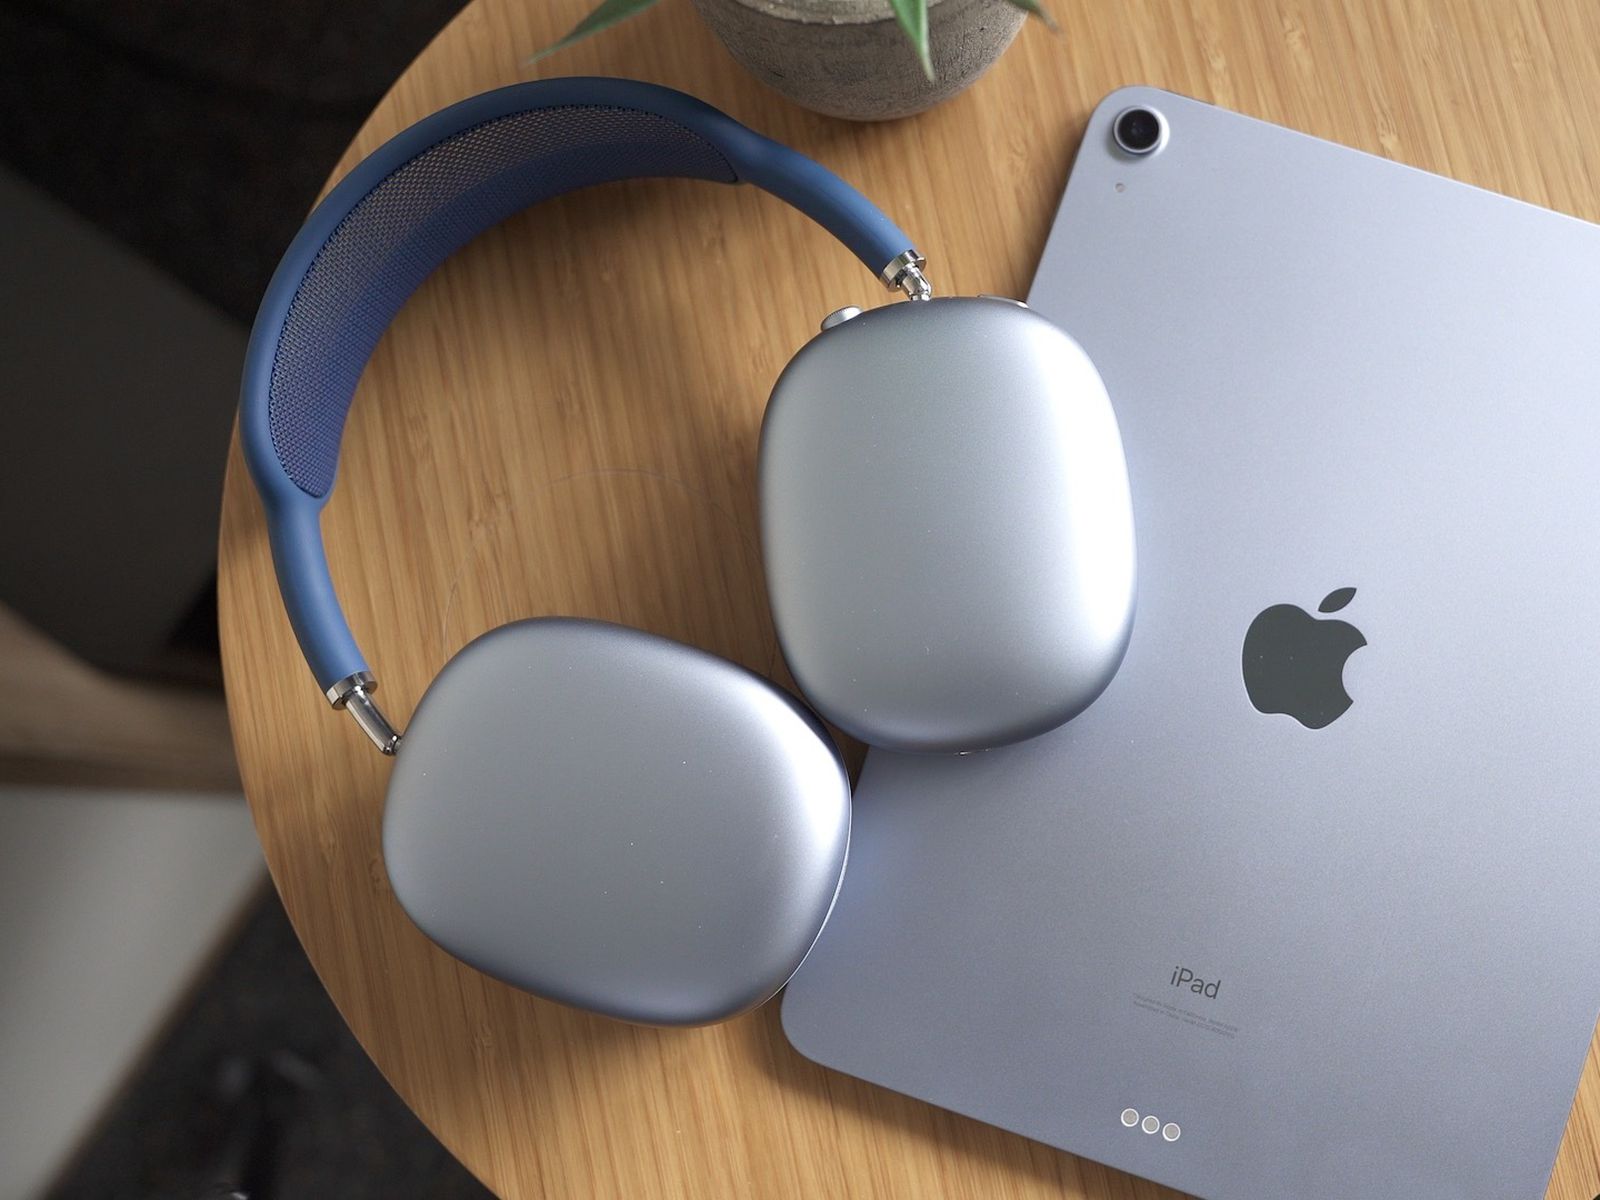 AirPods Max: Should You Buy? Everything We Know